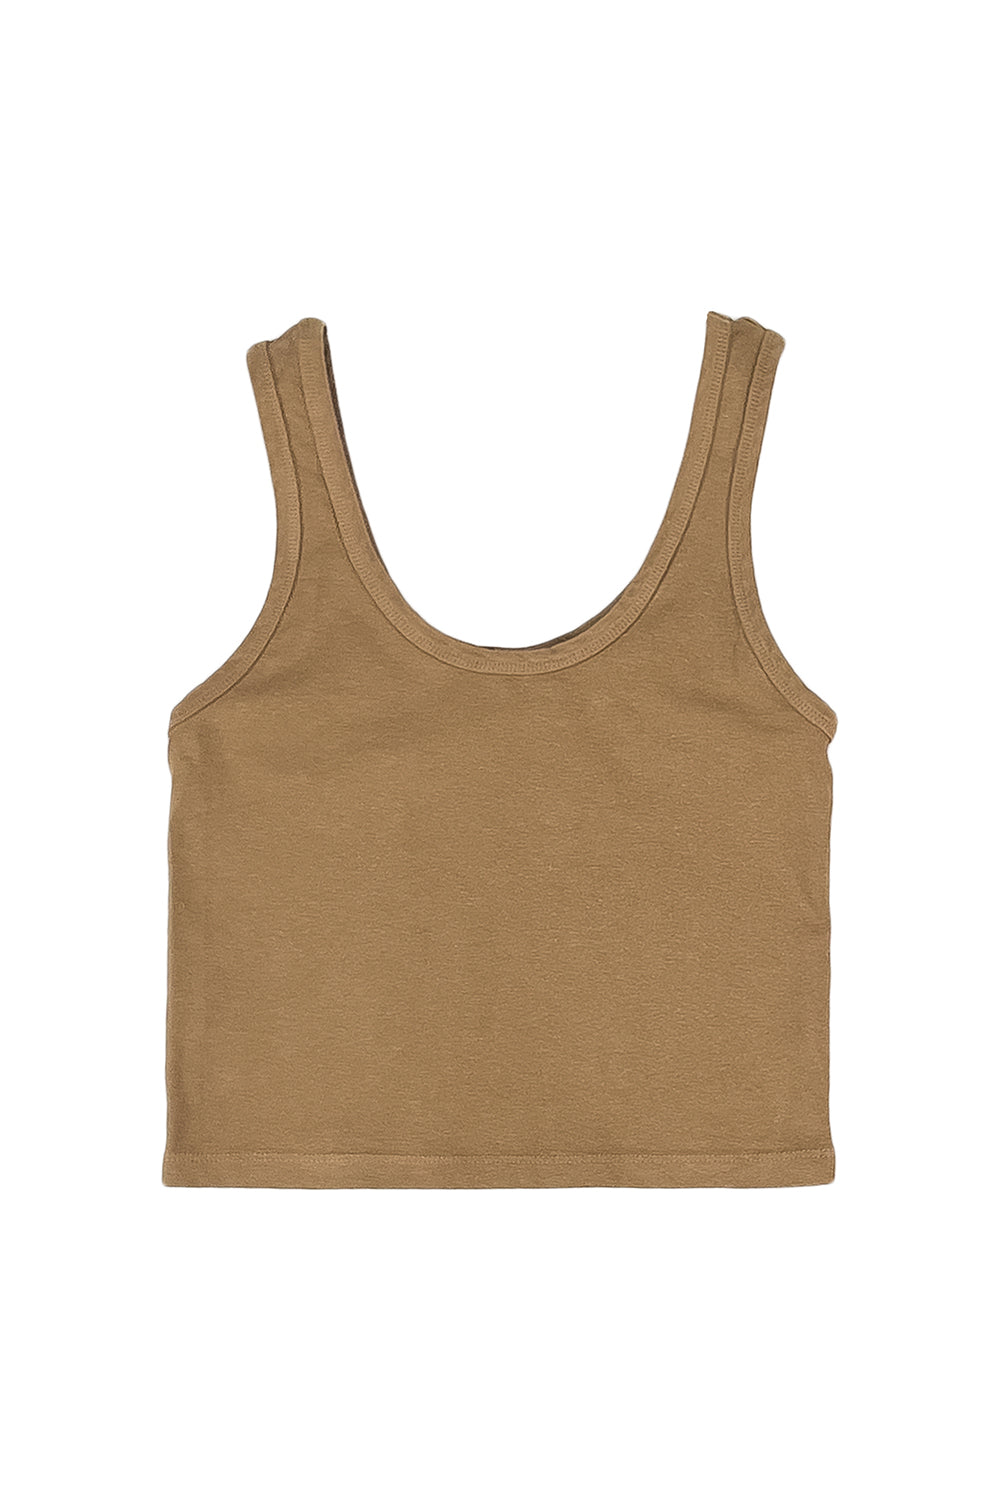 Sporty Tank | Jungmaven Hemp Clothing & Accessories / Color: Coyote